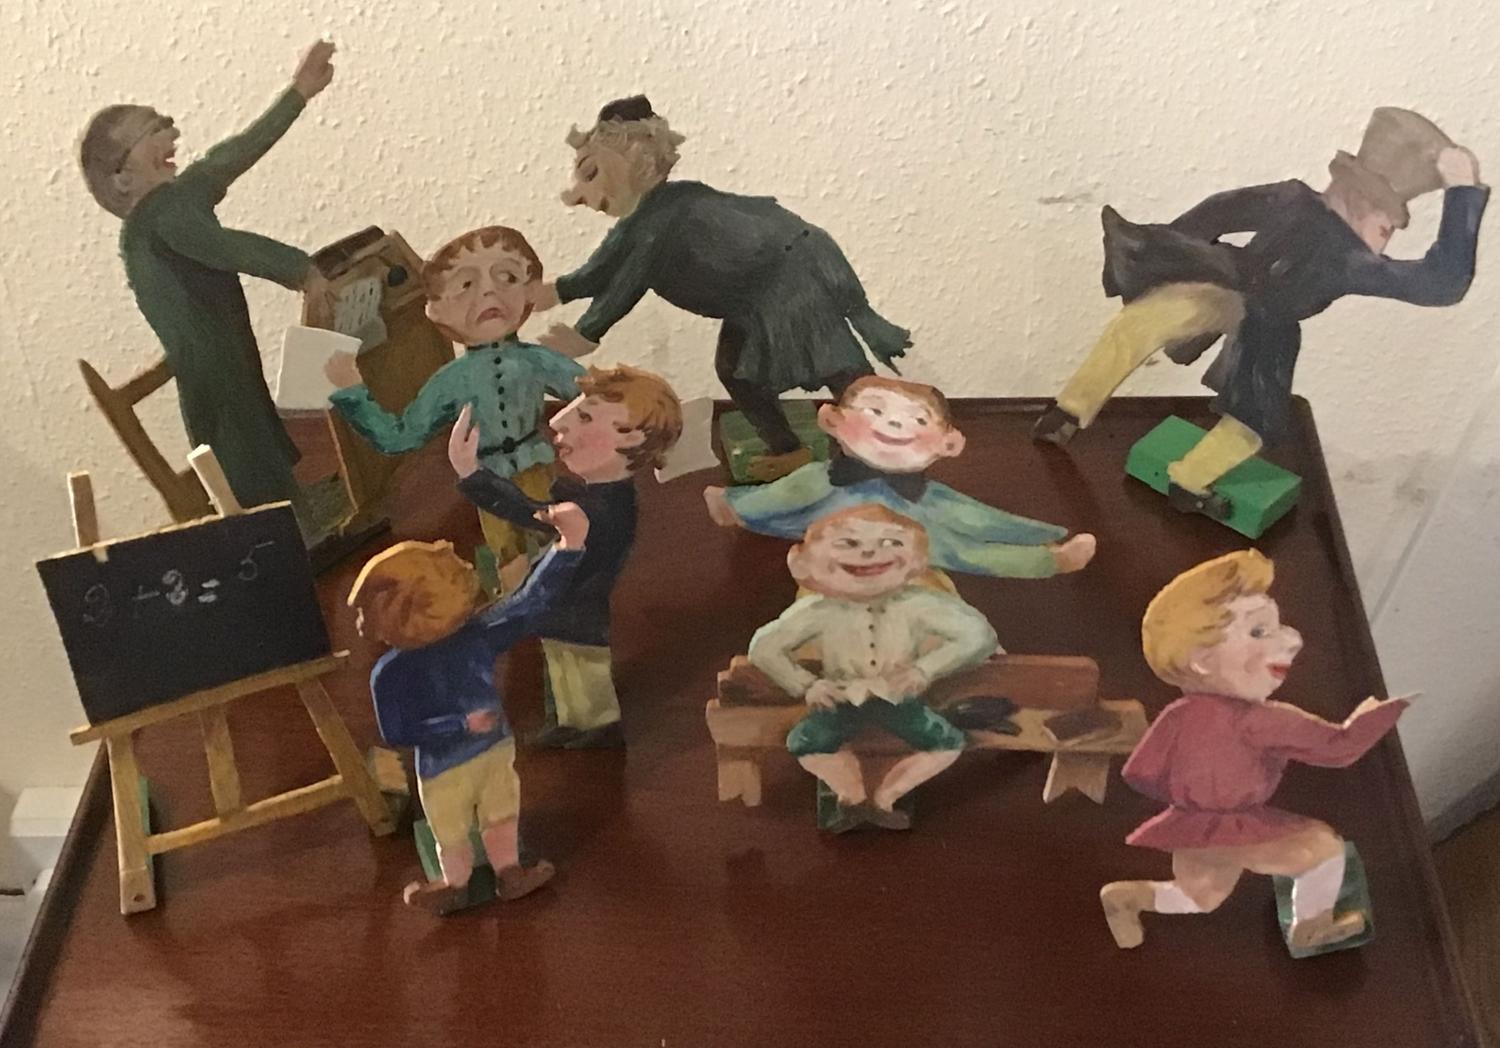 School room cut out figures